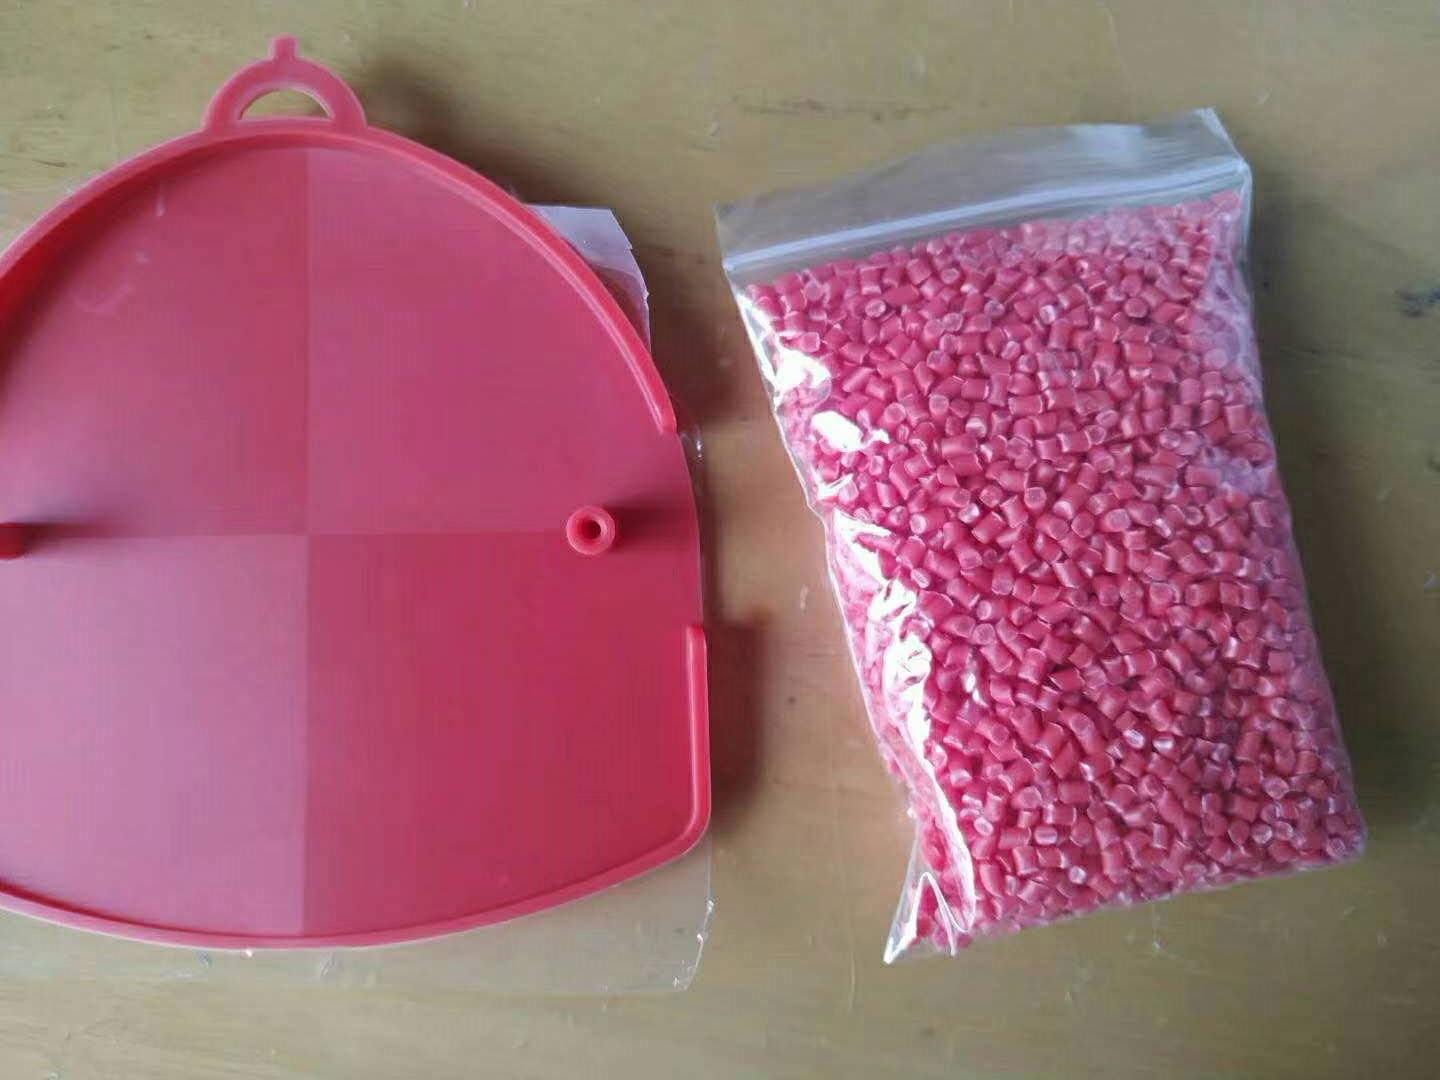 POK Korea supply xiaoxing M335AR5FV red soft POK with high toughness impact